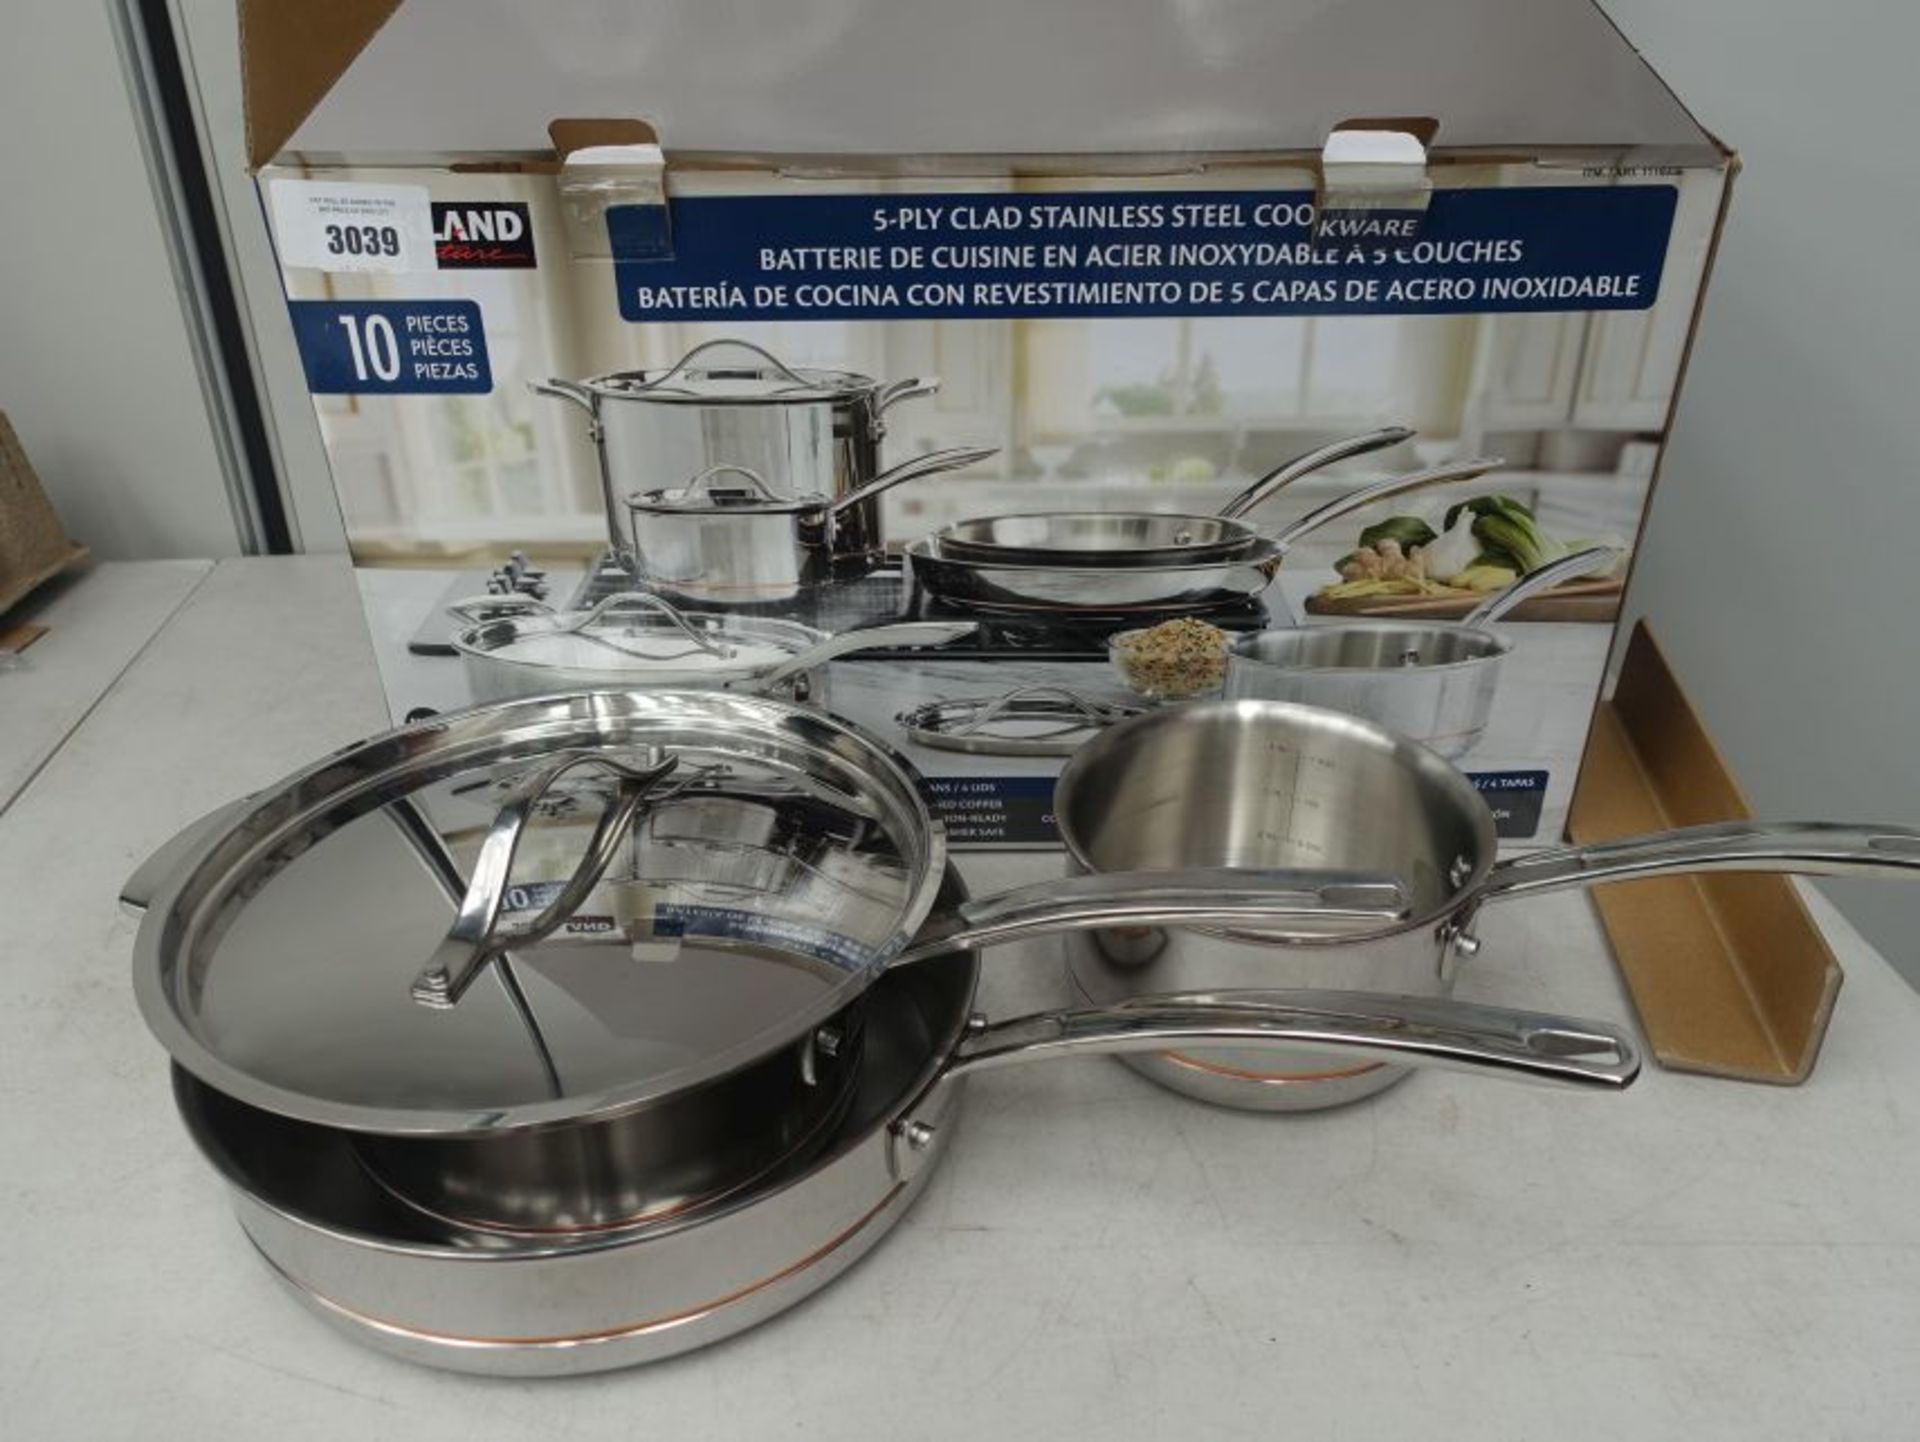 Boxed Kirkland stainless steel cookware set